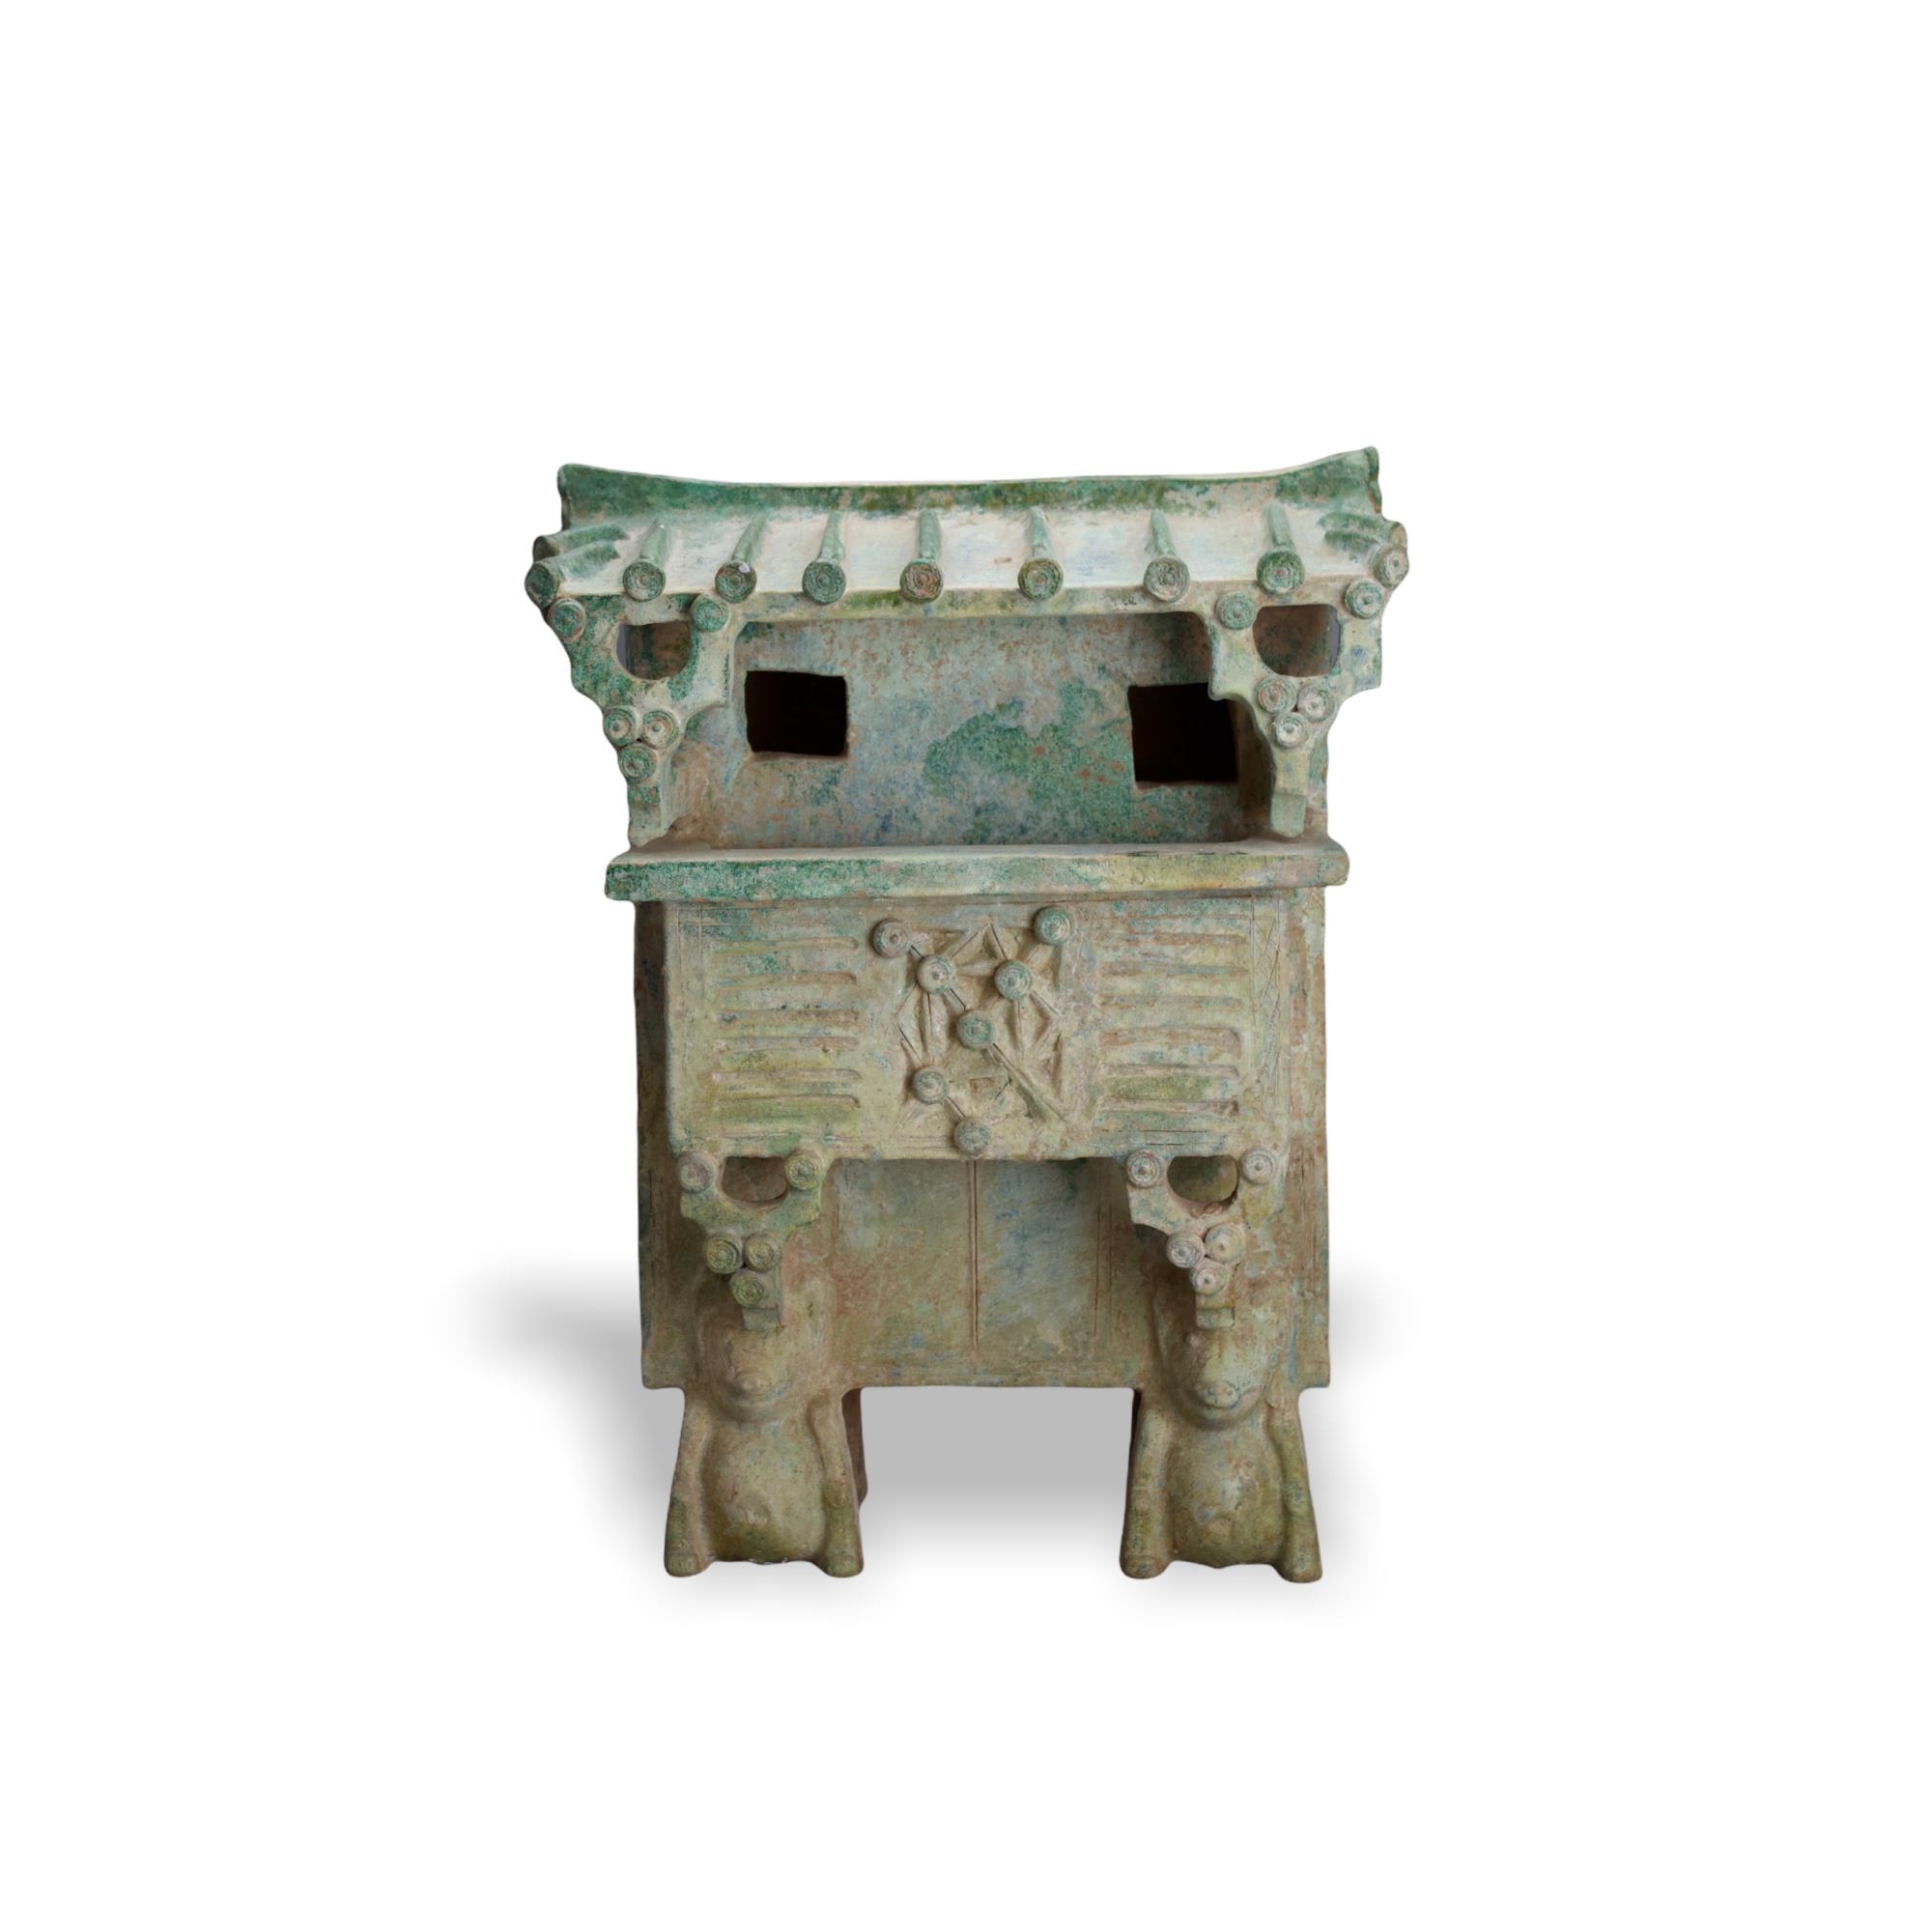 A rare green glazed pottery Watchtower, Han Dynasty - - H 46cm W 34cm D 21.5cm - - raised on four - Image 2 of 8